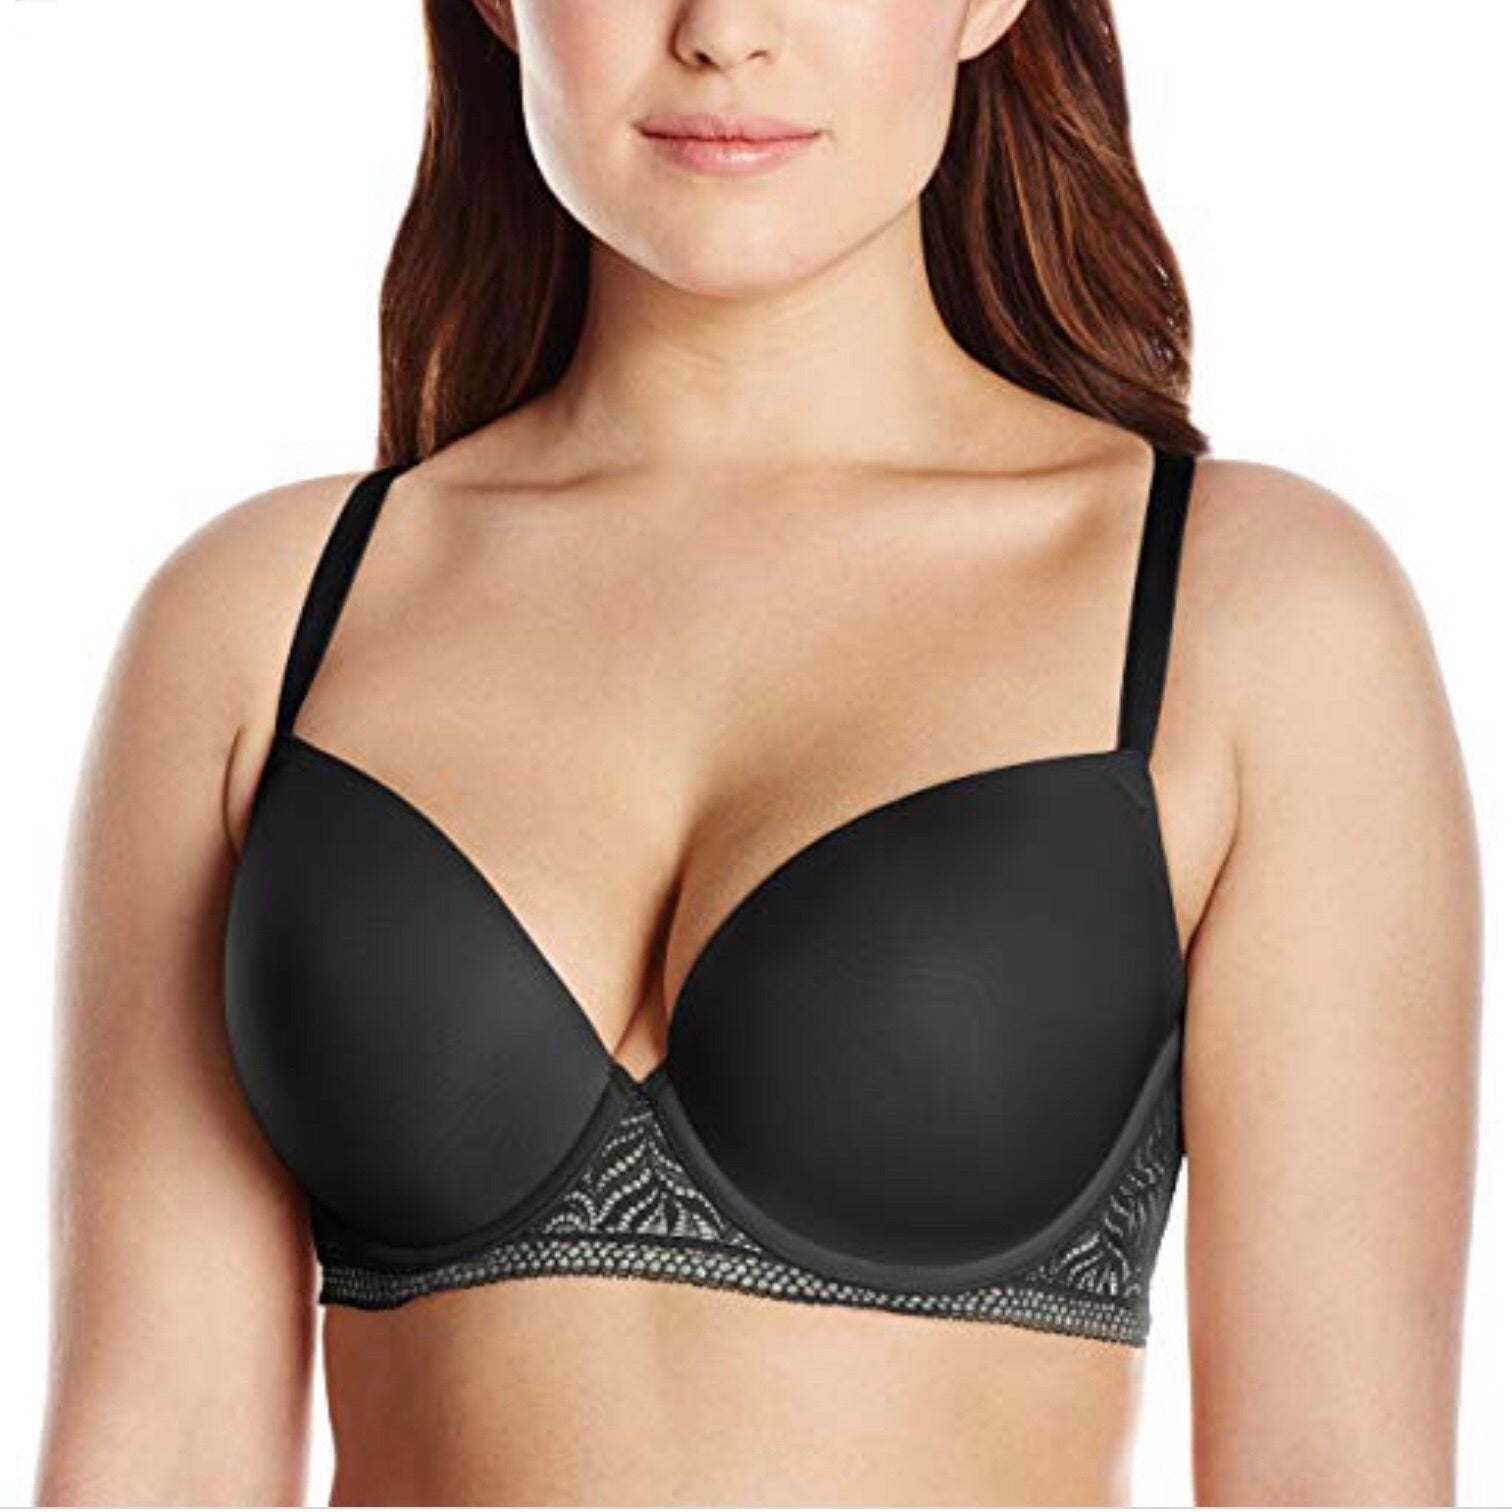 Paramour - Carolina T-Back Bra - More Colors – About the Bra